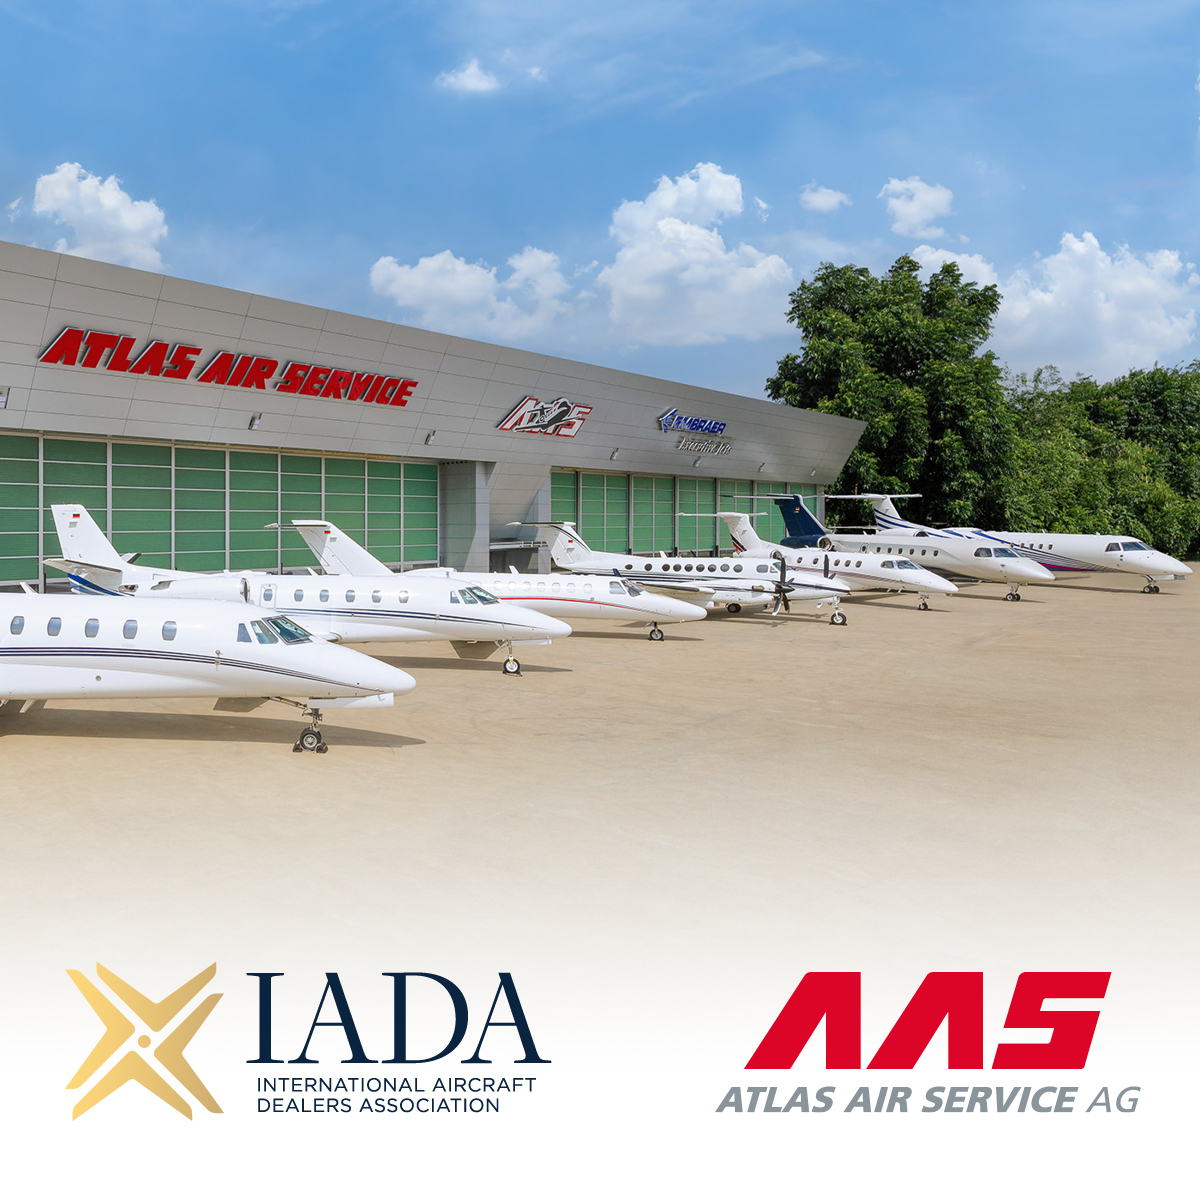 Atlas Air Service is an accredited member of the IADA